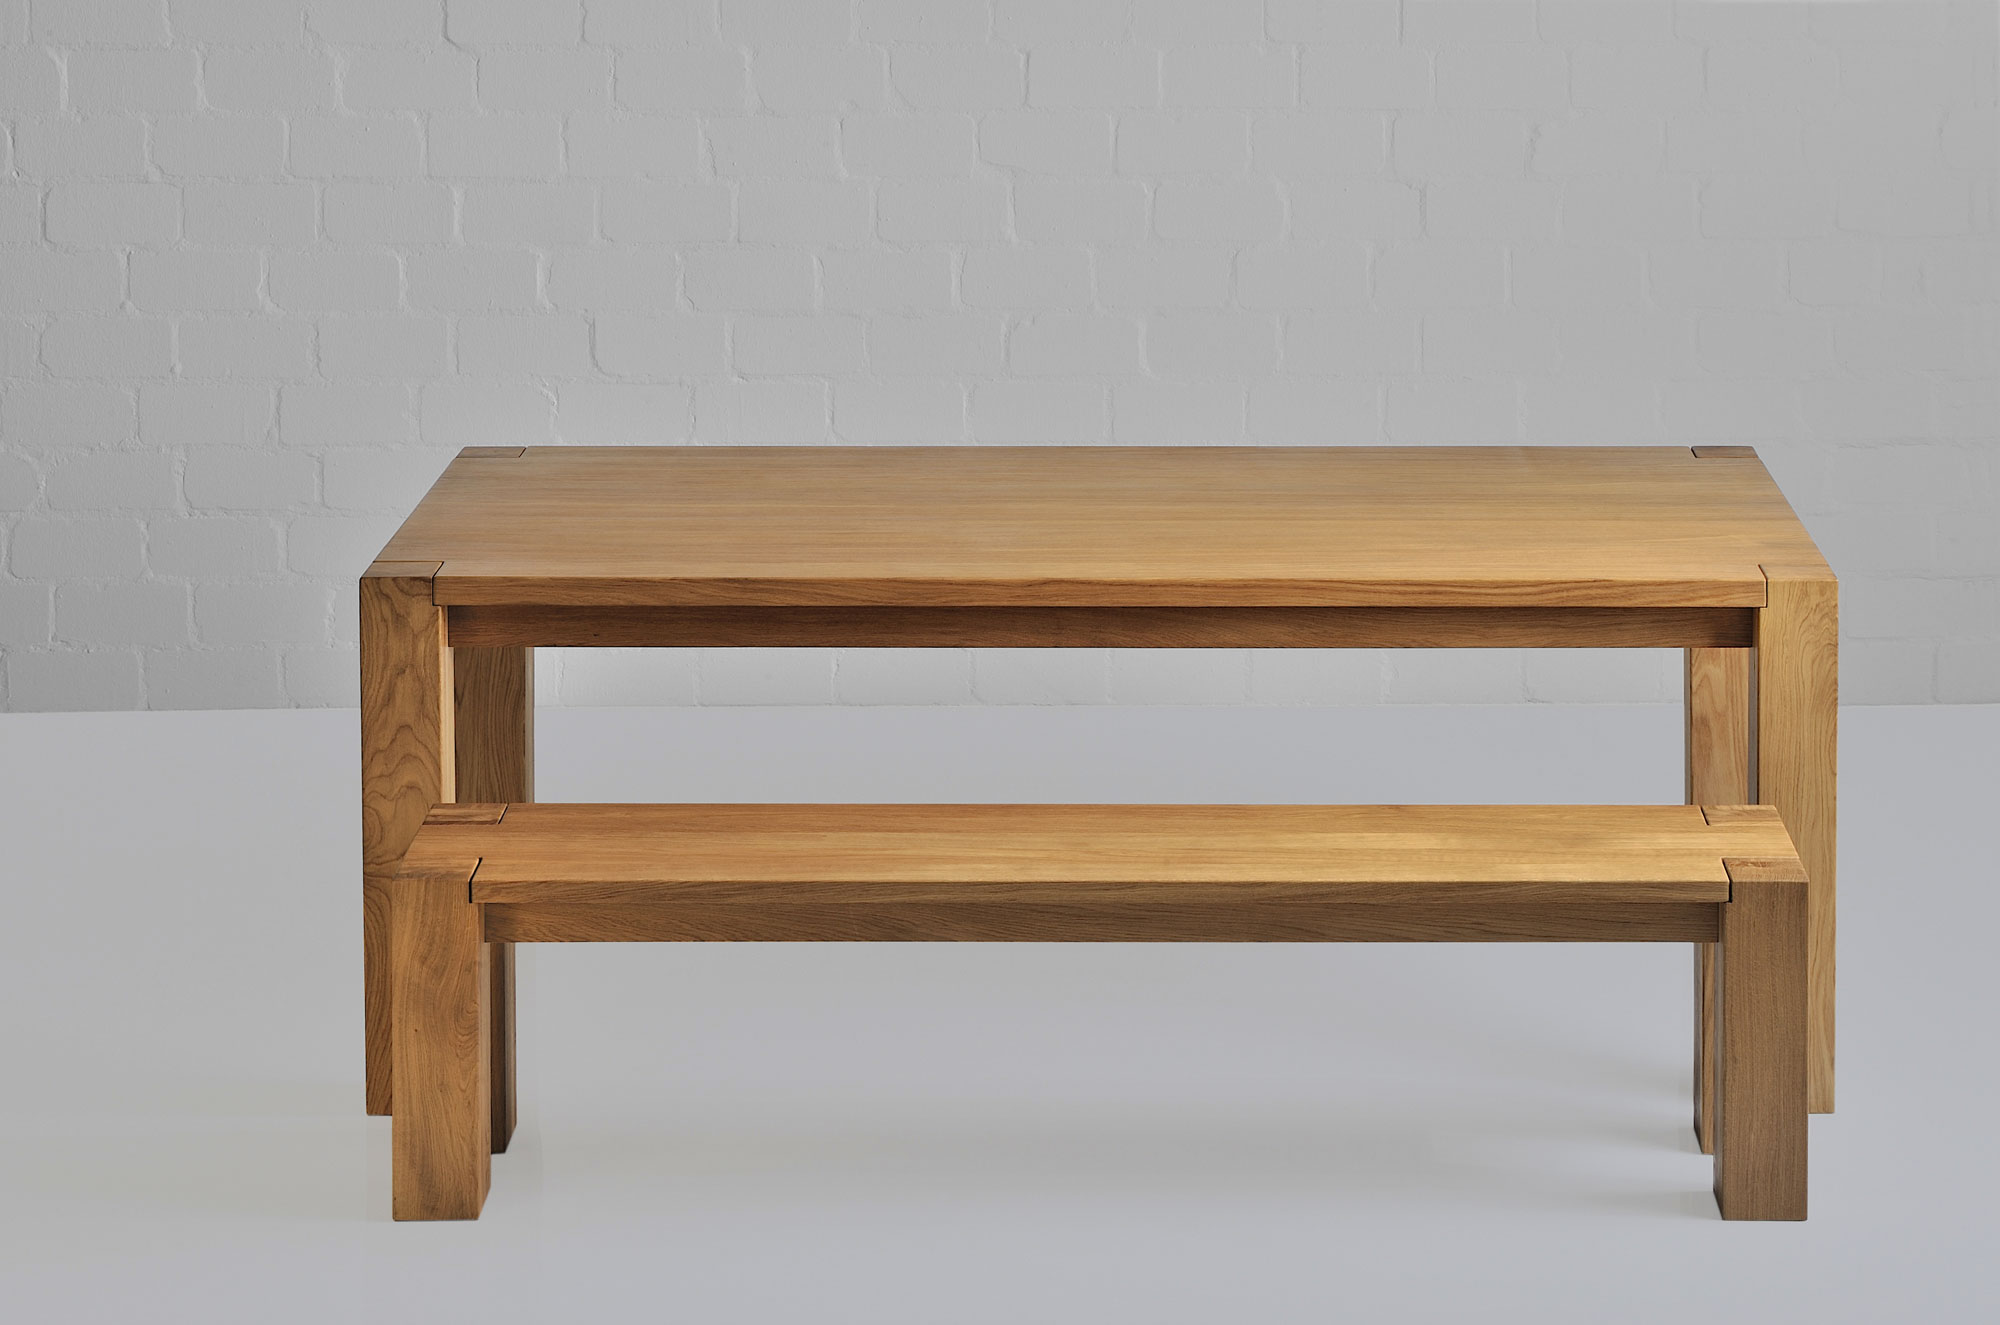 Rustic Solid Wood Bench TAURUS 4 B14X14 1368 custom made in solid wood by vitamin design